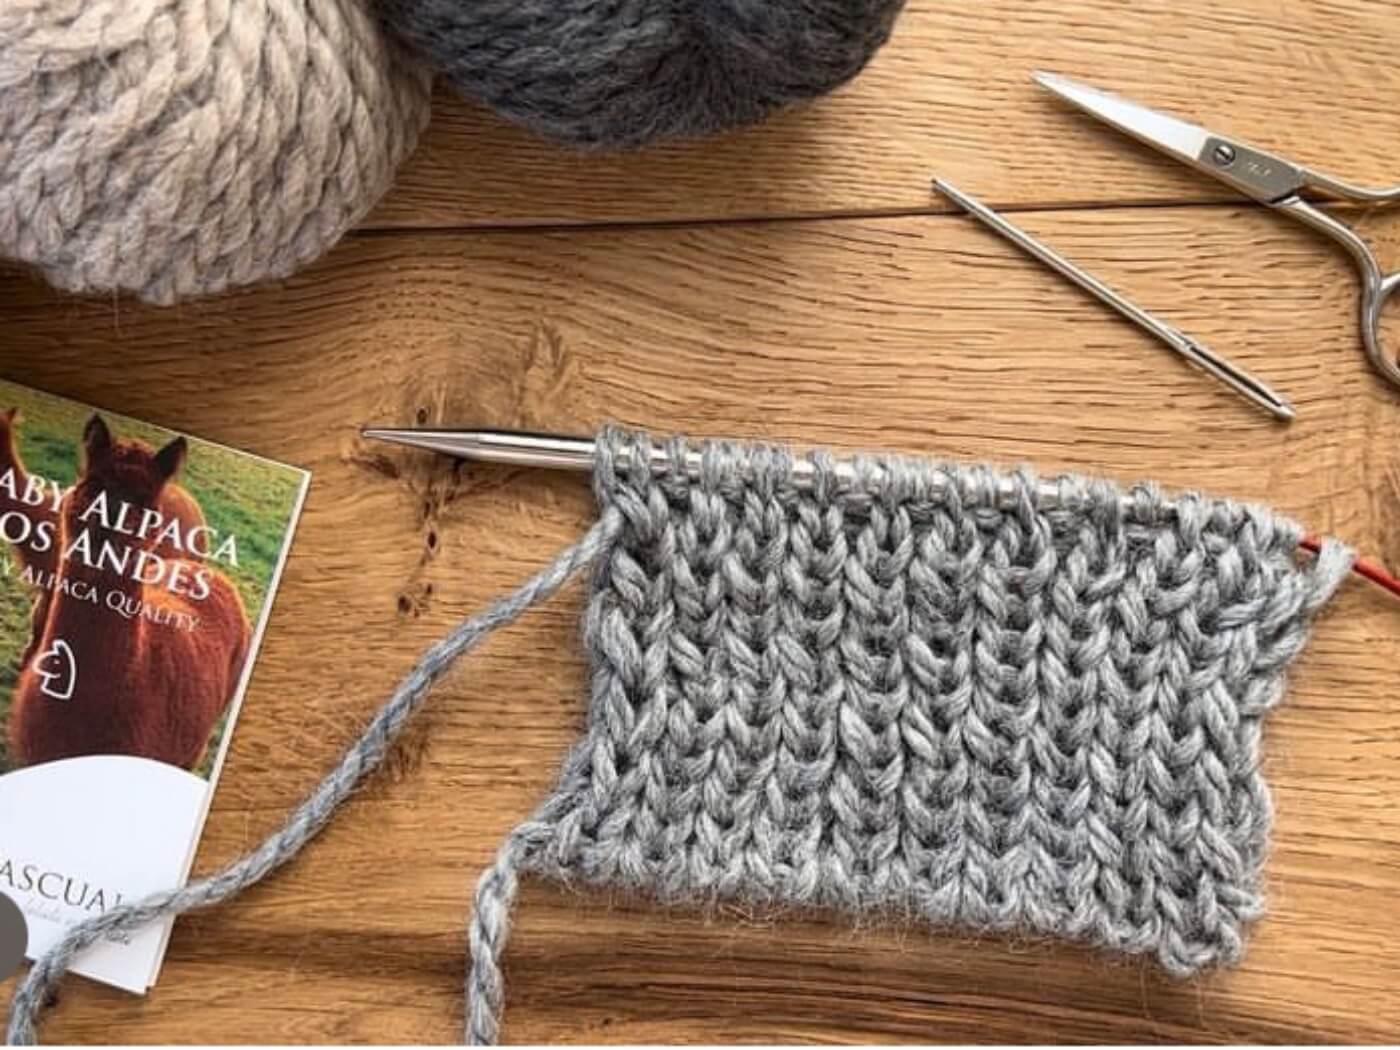 7 reasons why circular knitting needles are better than straights - Craft  Fix